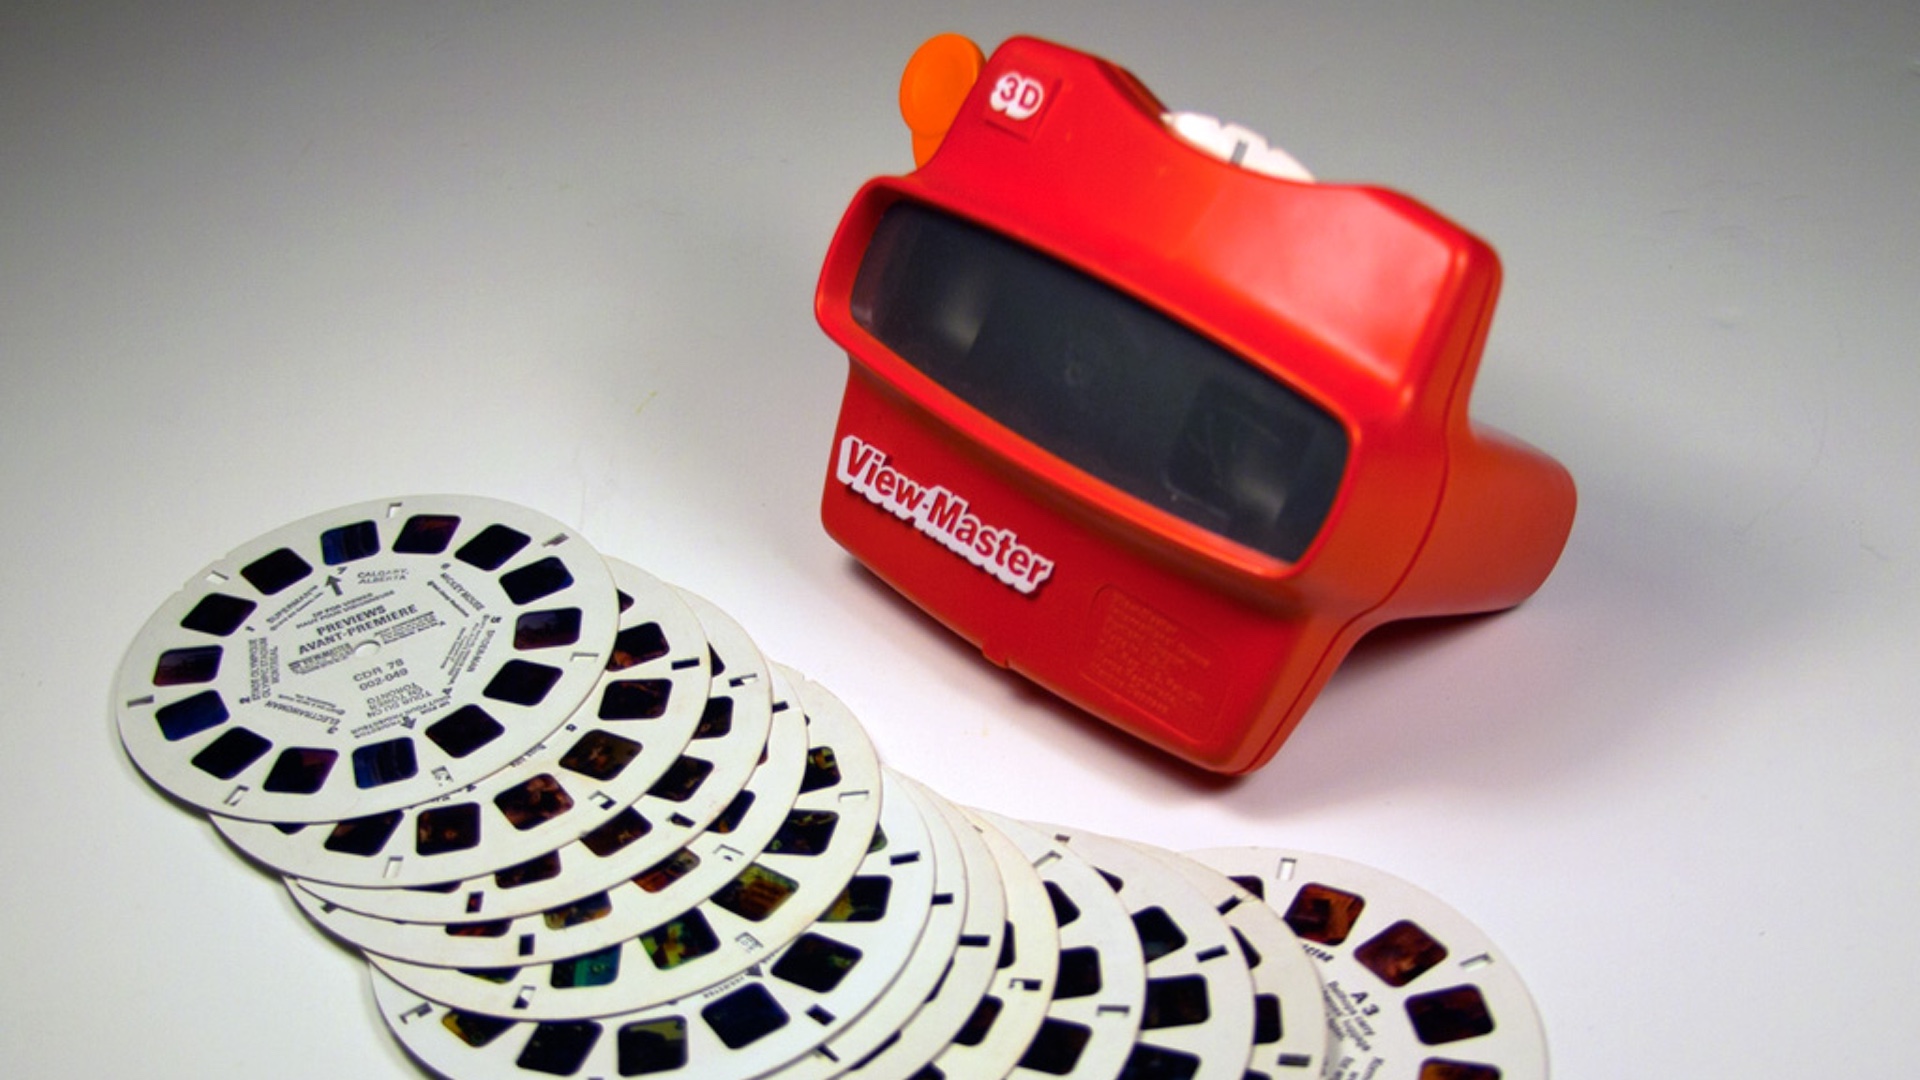 View-Master Wallpapers